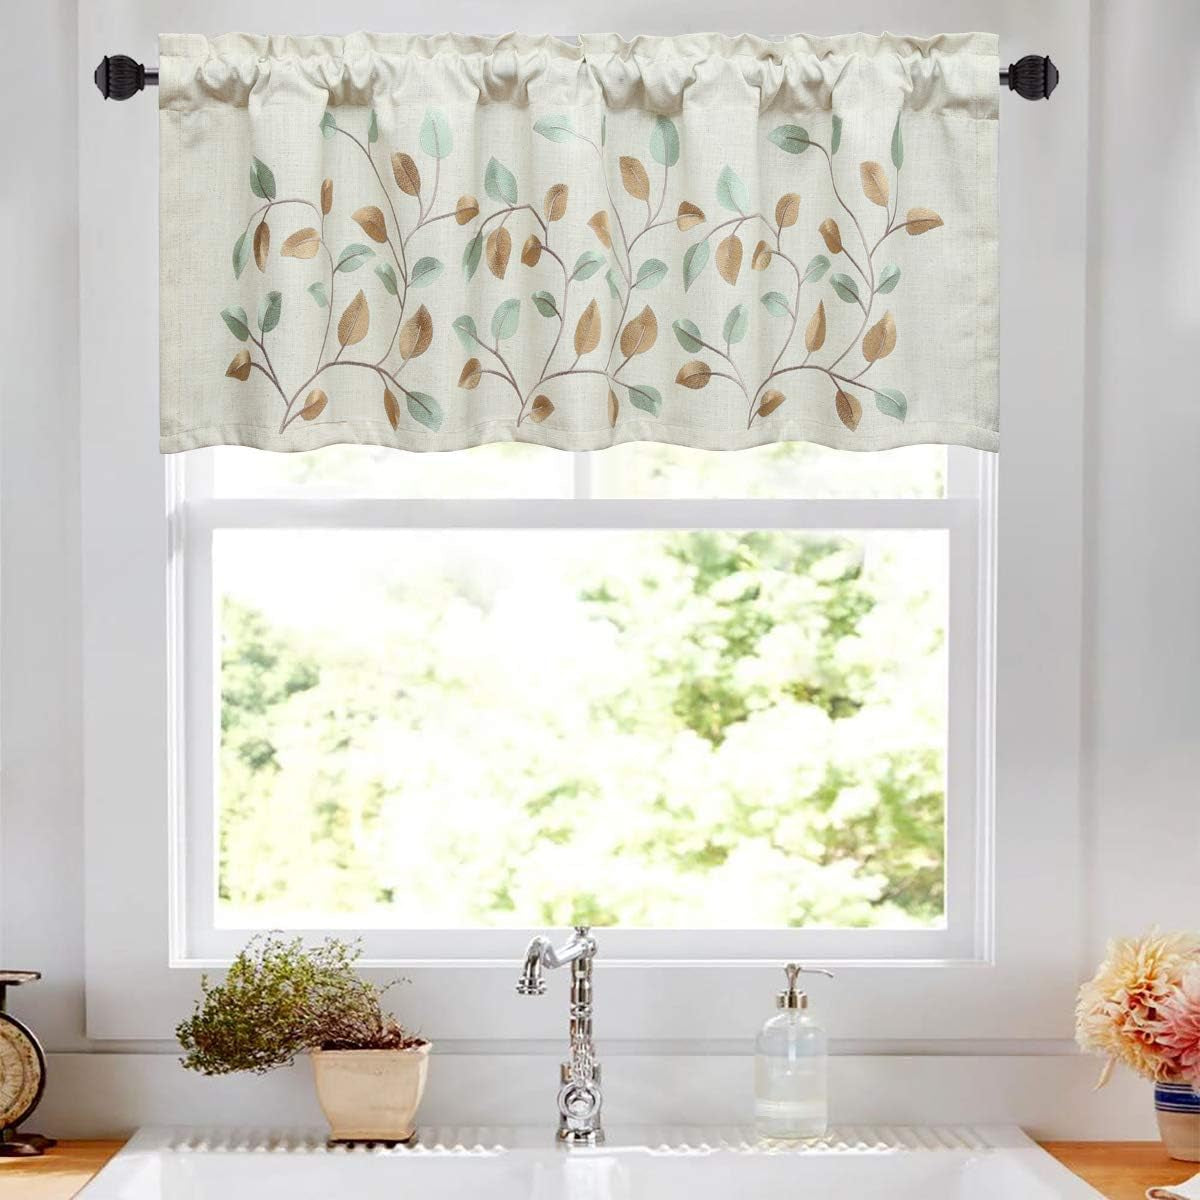 VOGOL Linen Valances for Living Room, Vintage Floral Valance for Bedroom, Rod Pocket Valance Curtains for Dining Room, 52''W X 18''L, One Panel, Flower Embroidery  YouYee W014  